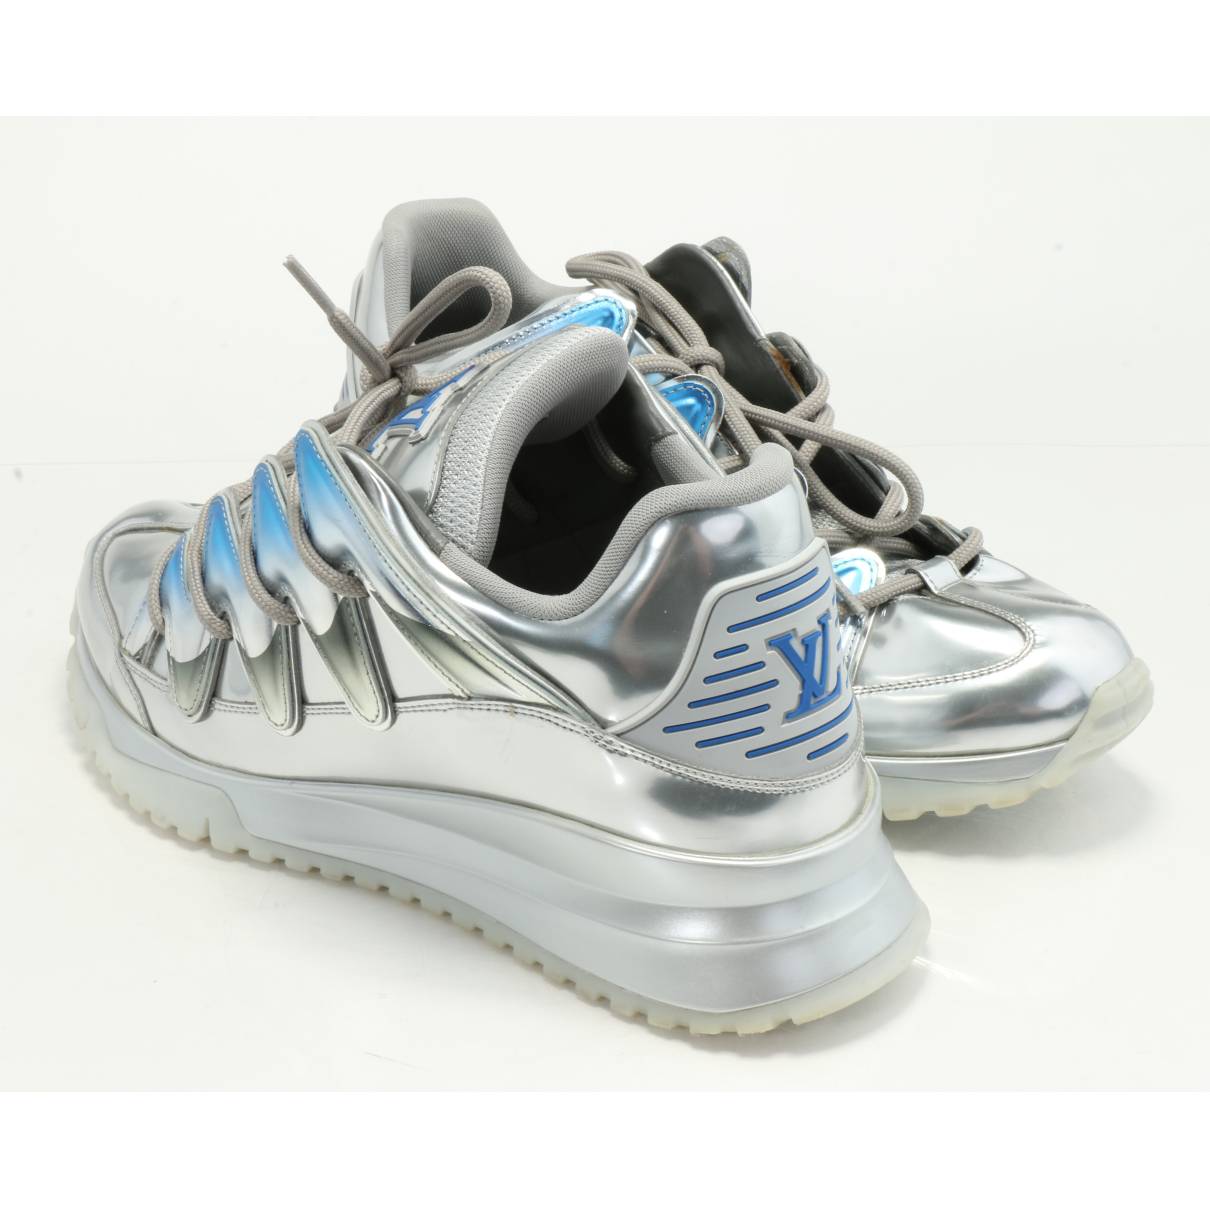 Leather trainers Louis Vuitton Silver size 8.5 US in Leather